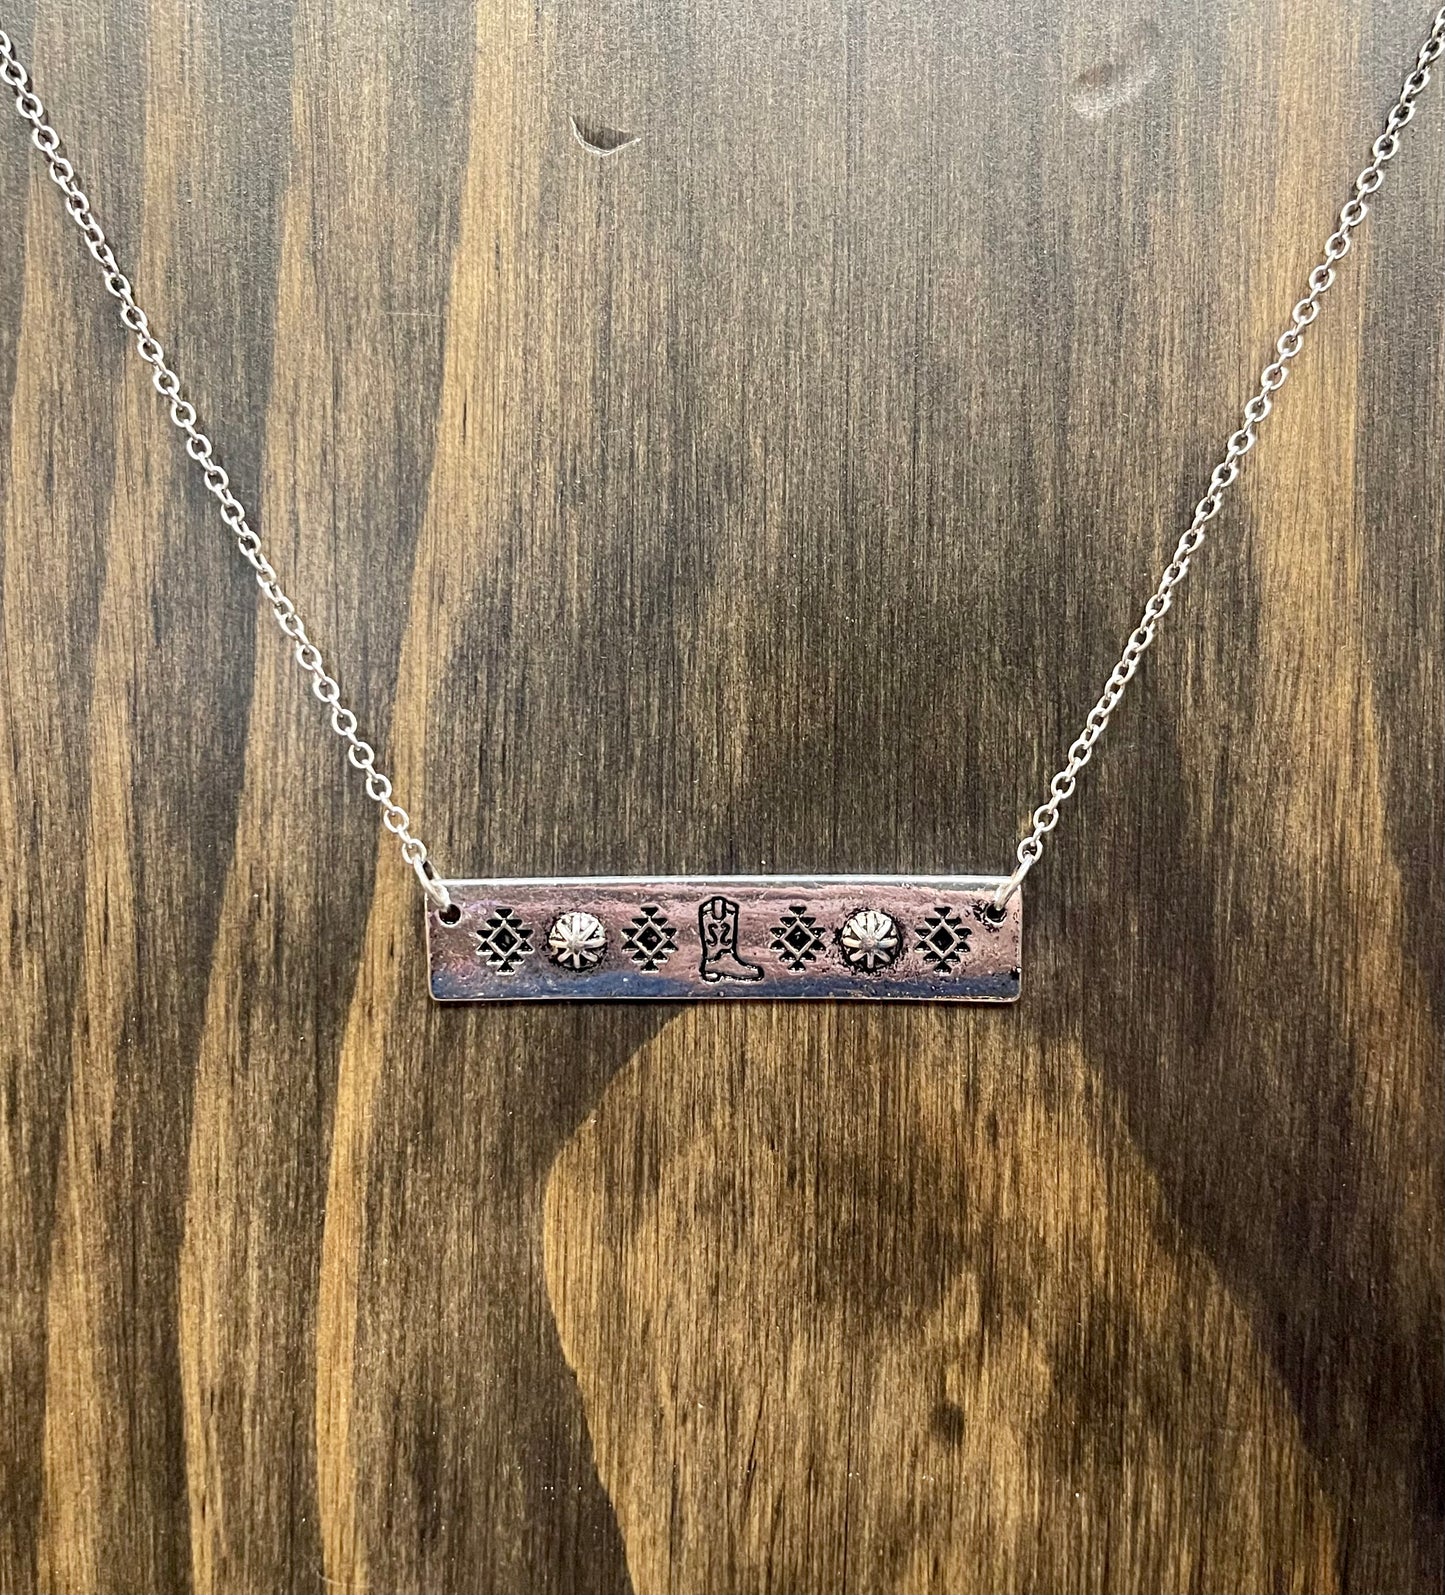 The Boot Bar Necklace